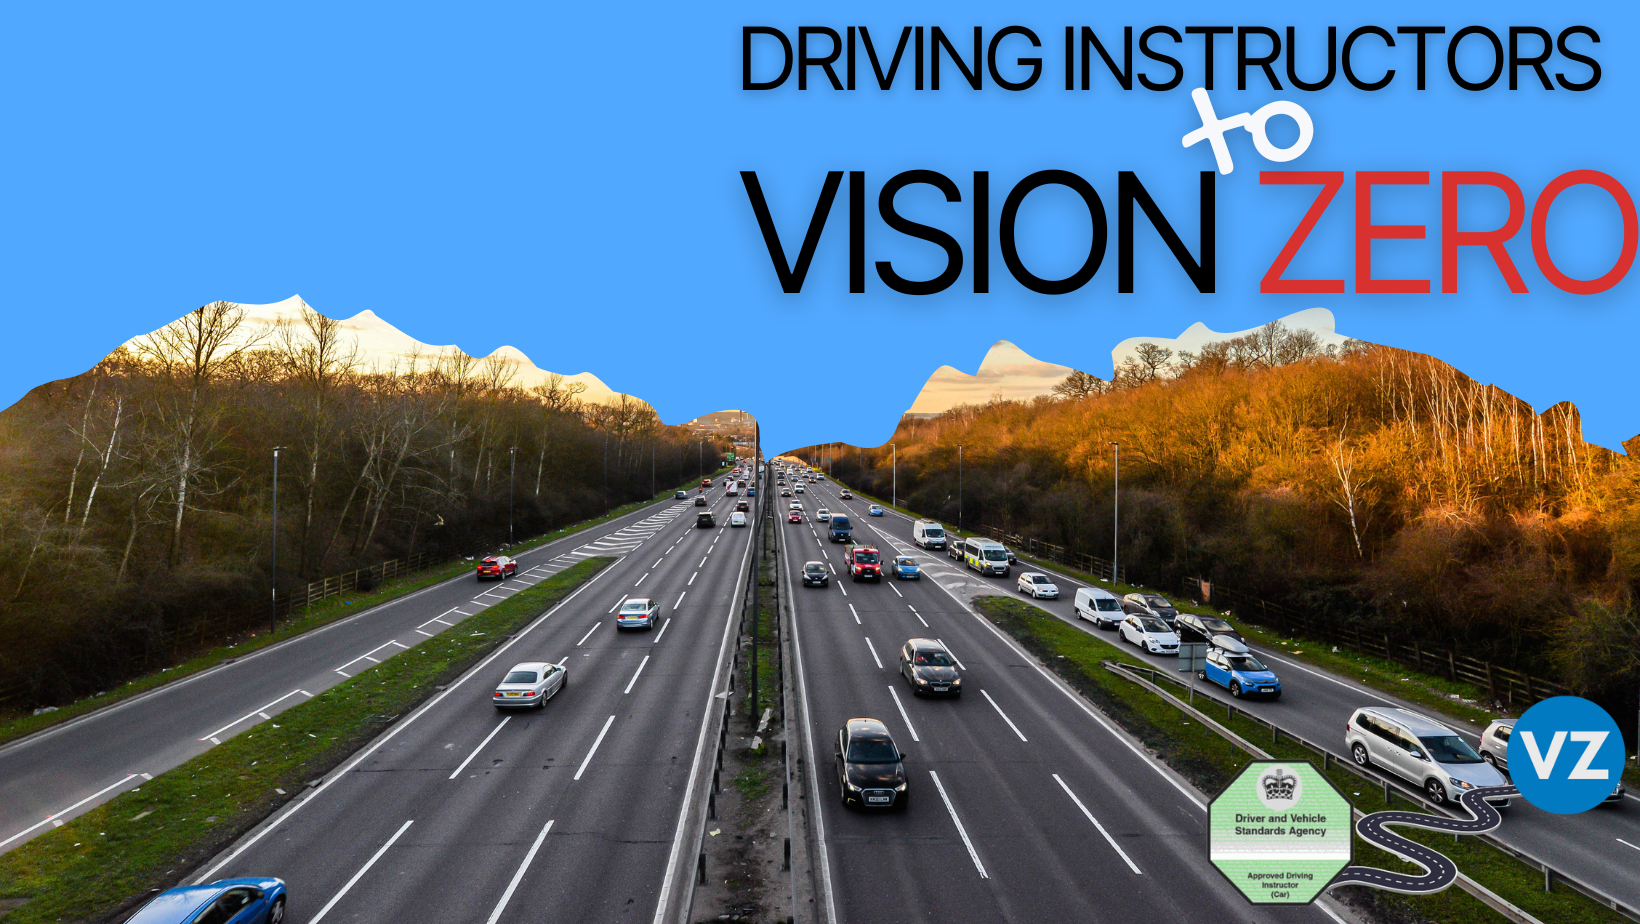 Driving Instructors to Vision Zero